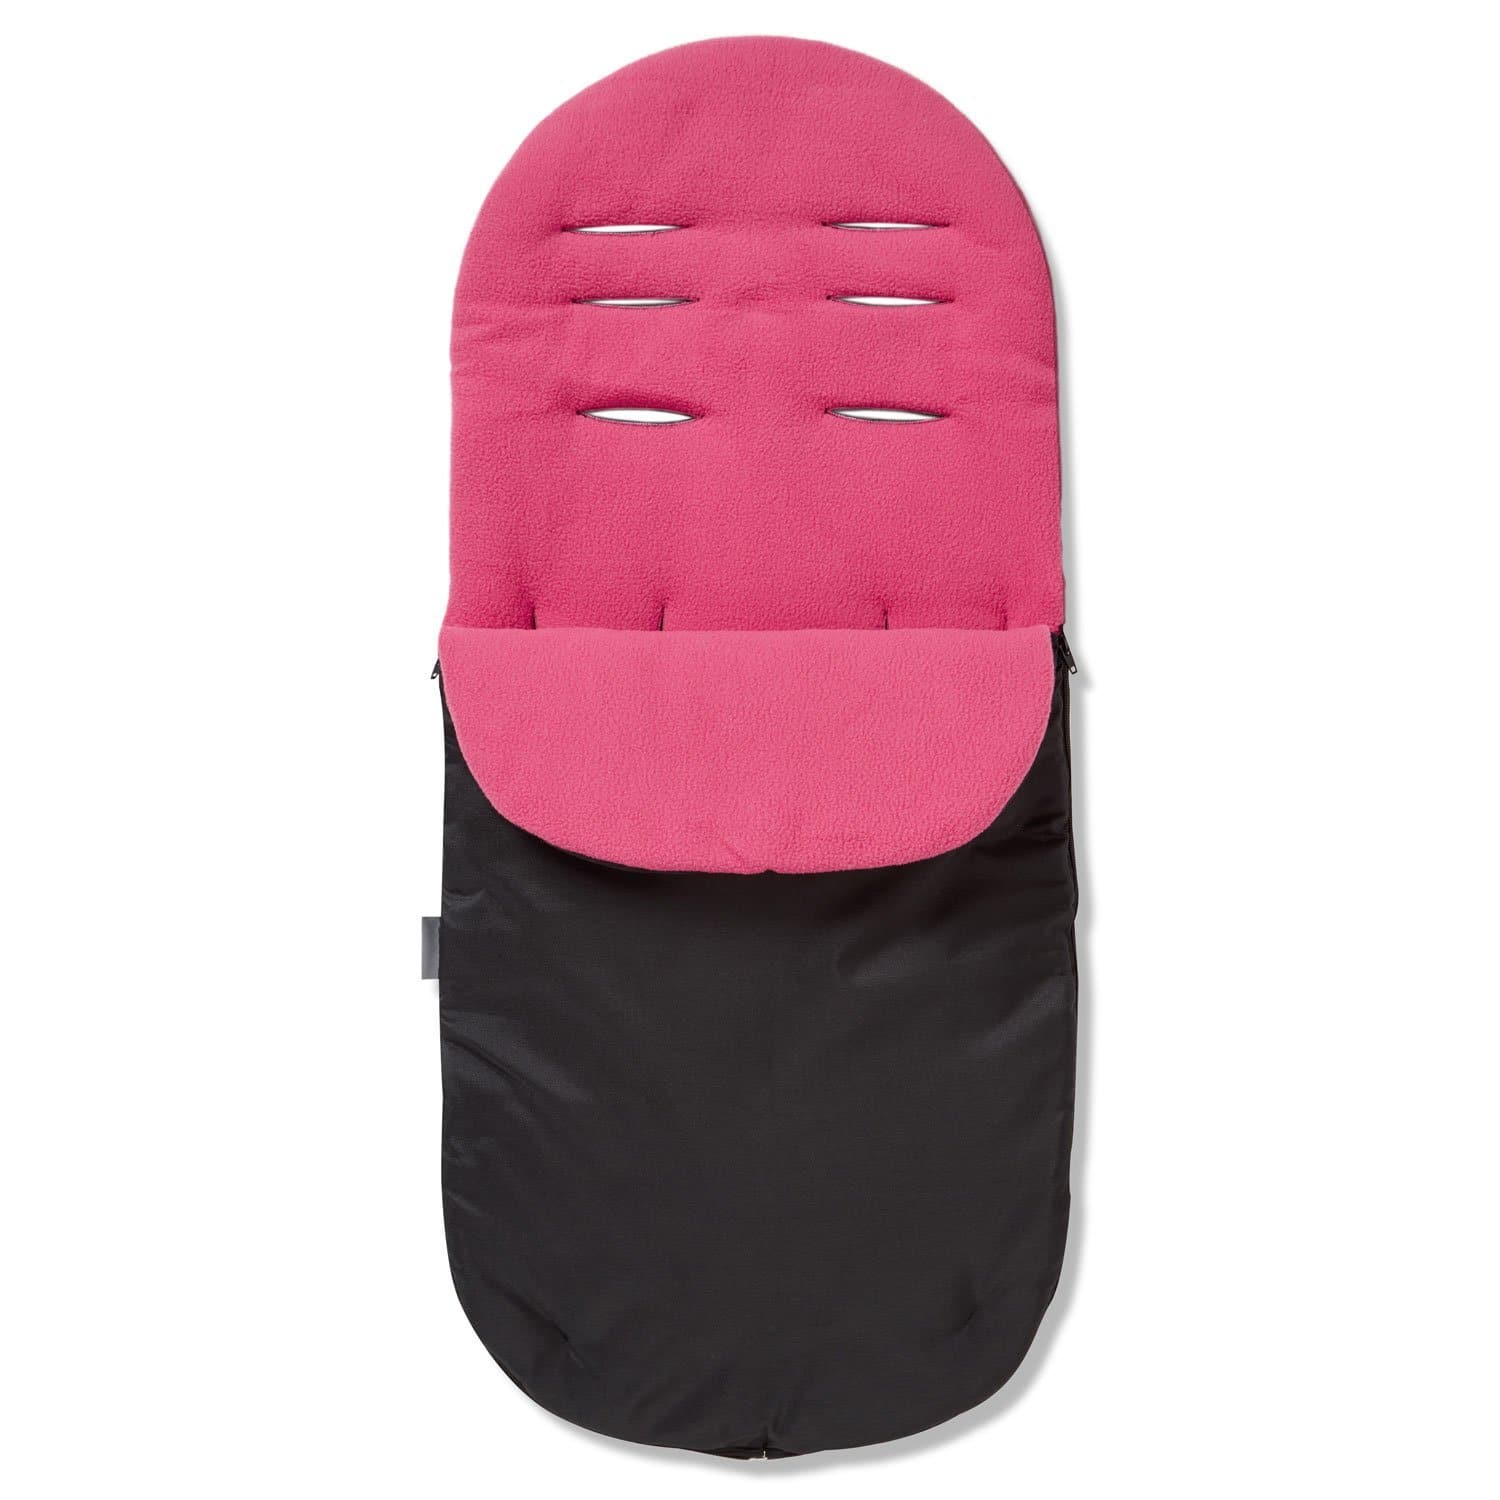 Footmuff / Cosy Toes Compatible with Joolz - Dark Pink / Fits All Models | For Your Little One